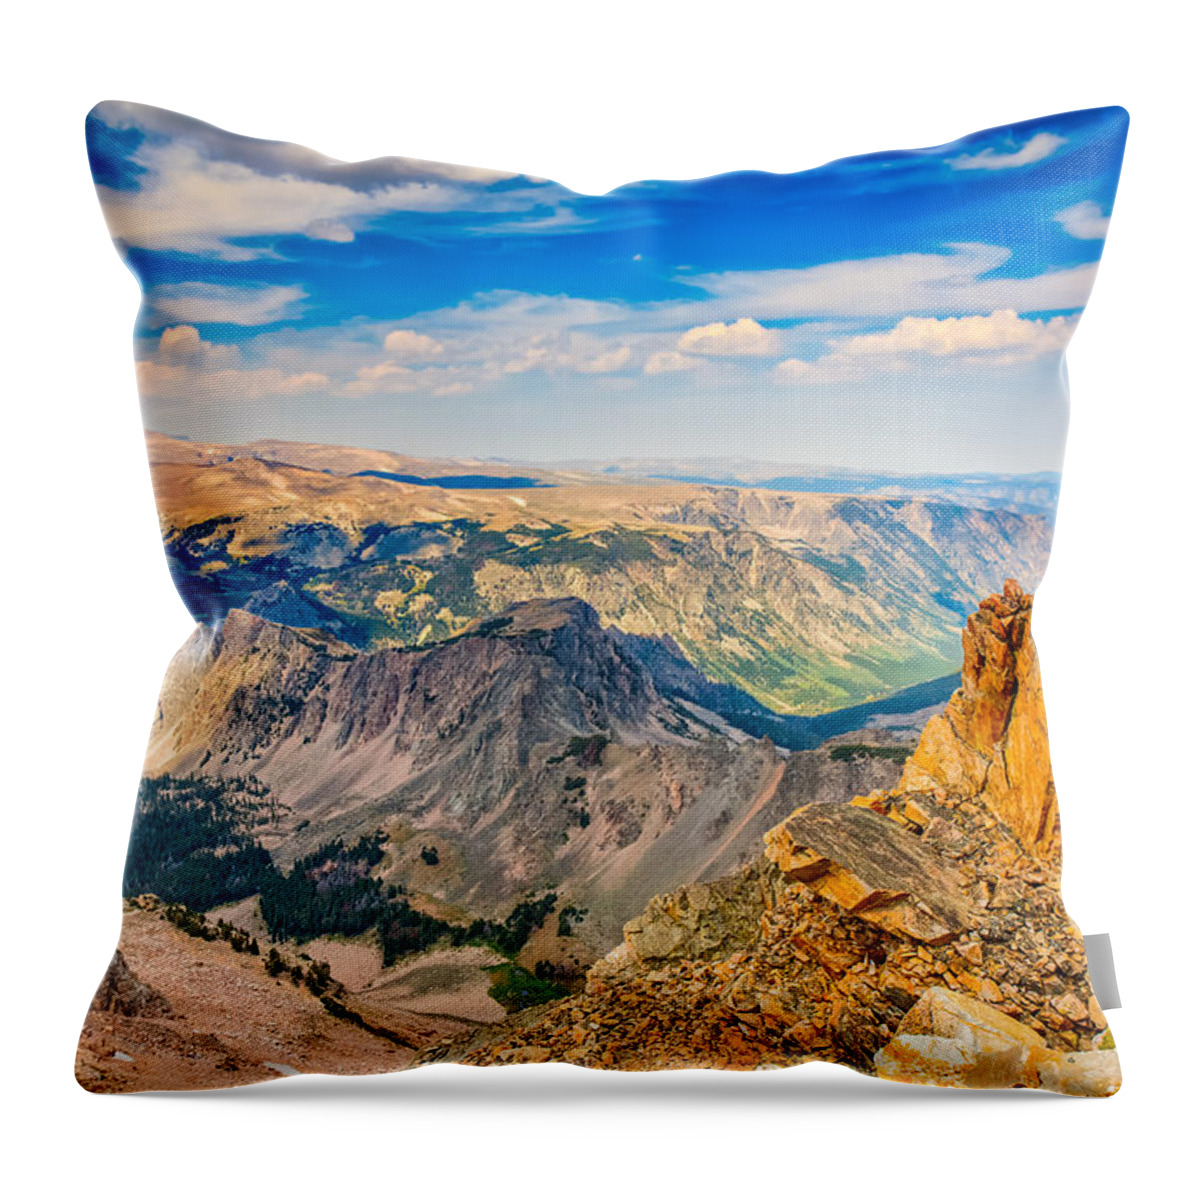 Adventure Throw Pillow featuring the photograph Beartooth Highway Scenic View by John M Bailey